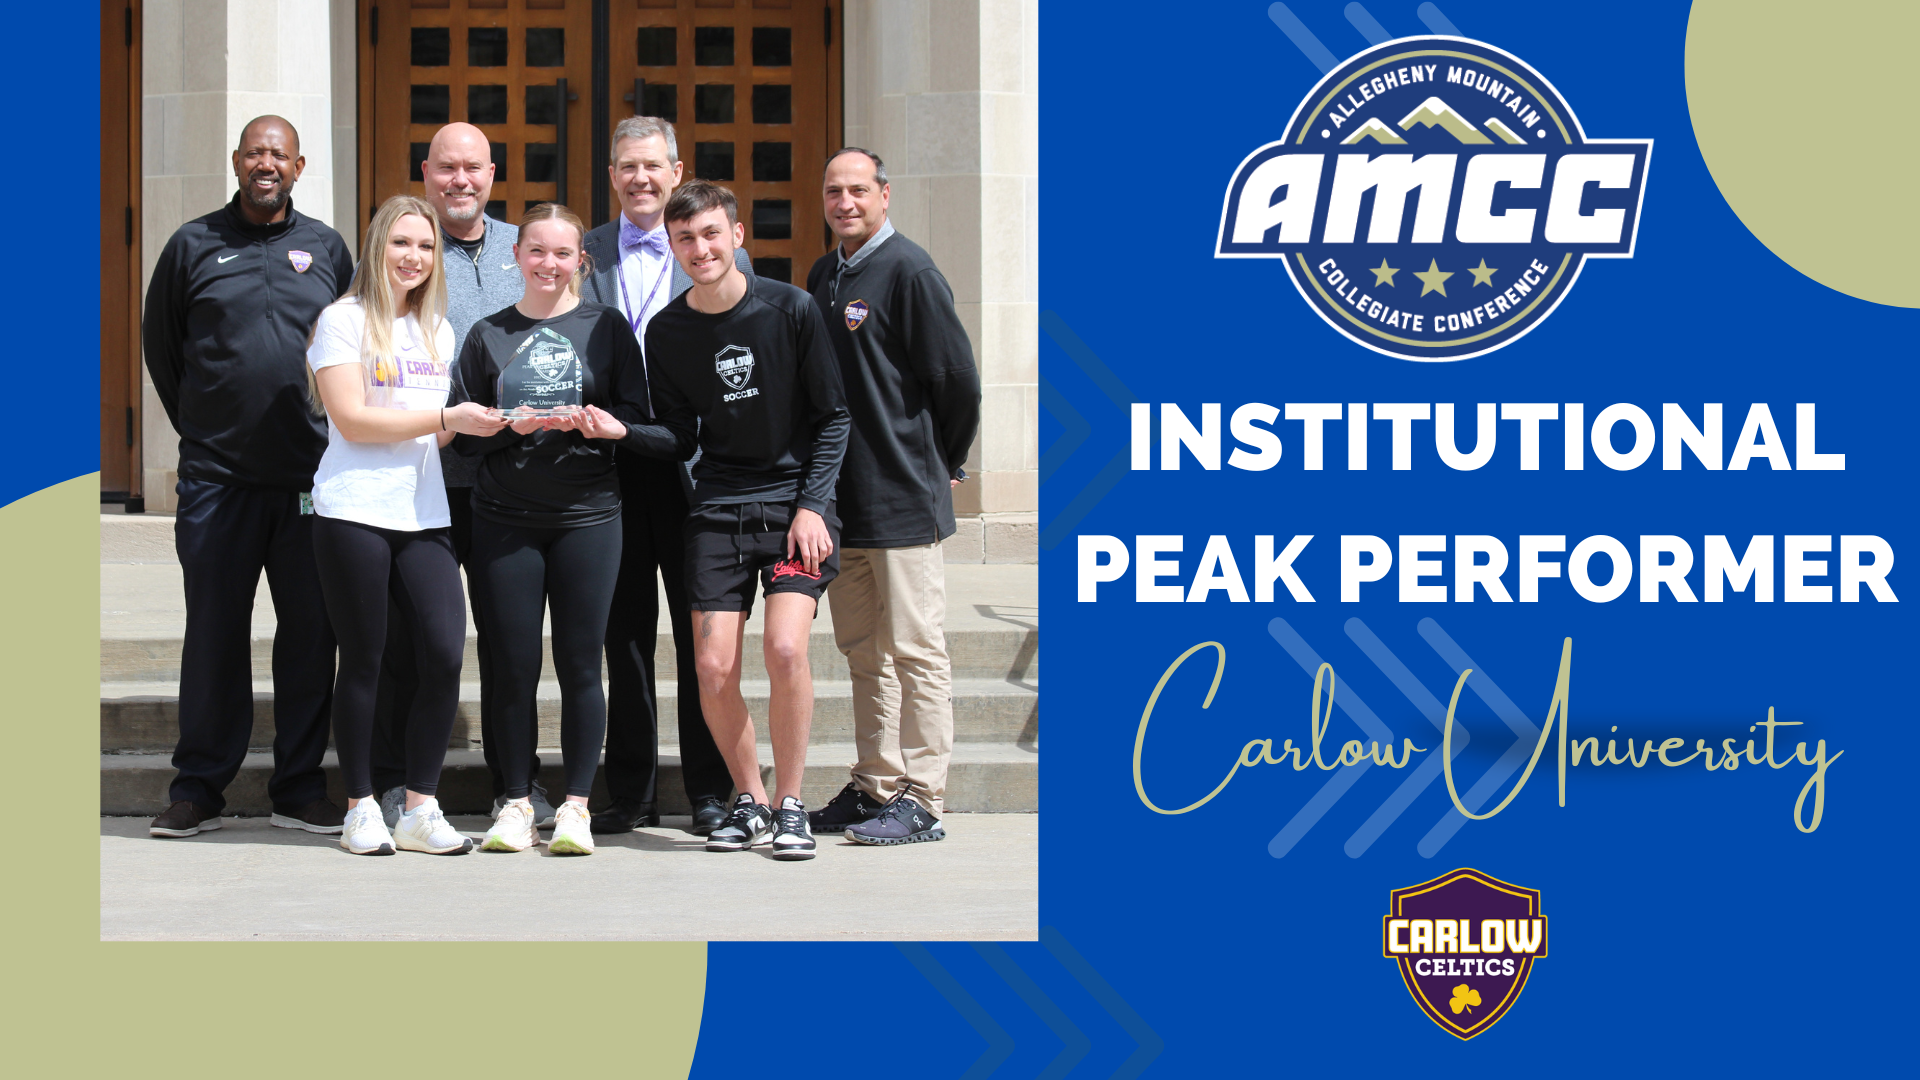 Members of Athletics administration and student-athletes pose with the award. Photo by Karina Graziani, graphic courtesy of AMCC.